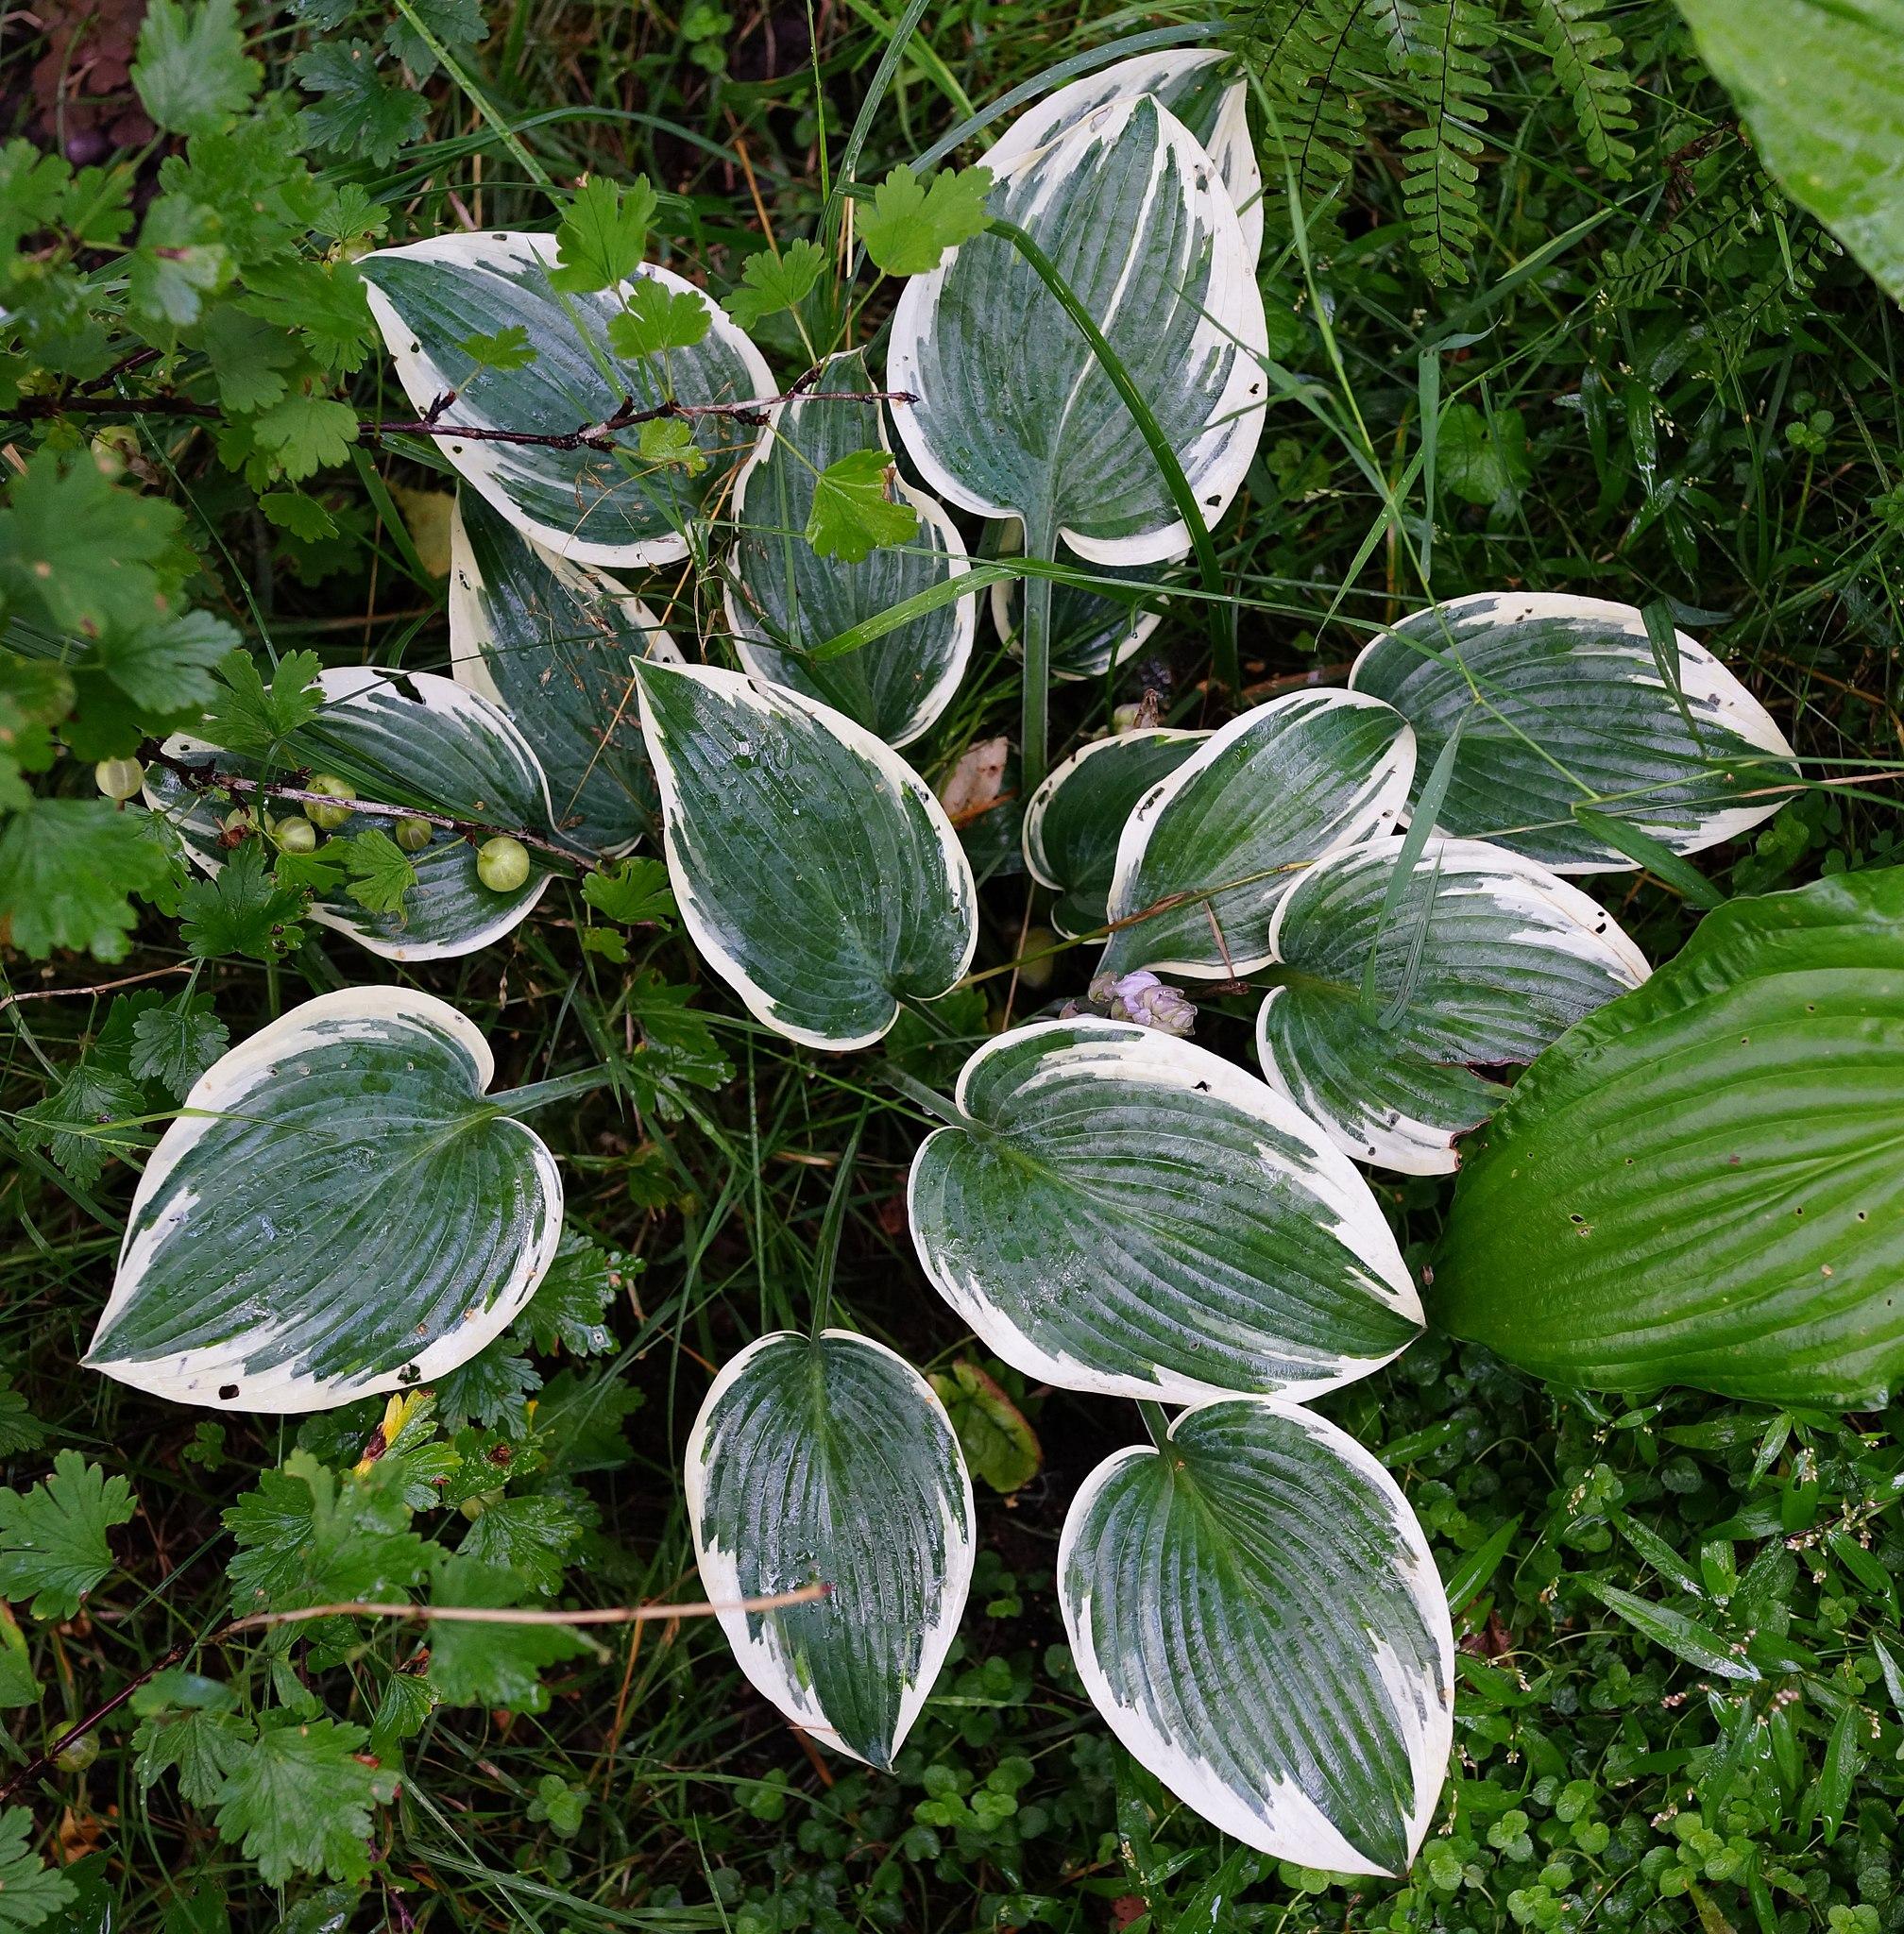 green-white leaves with green midrib, green petiole and white blades.